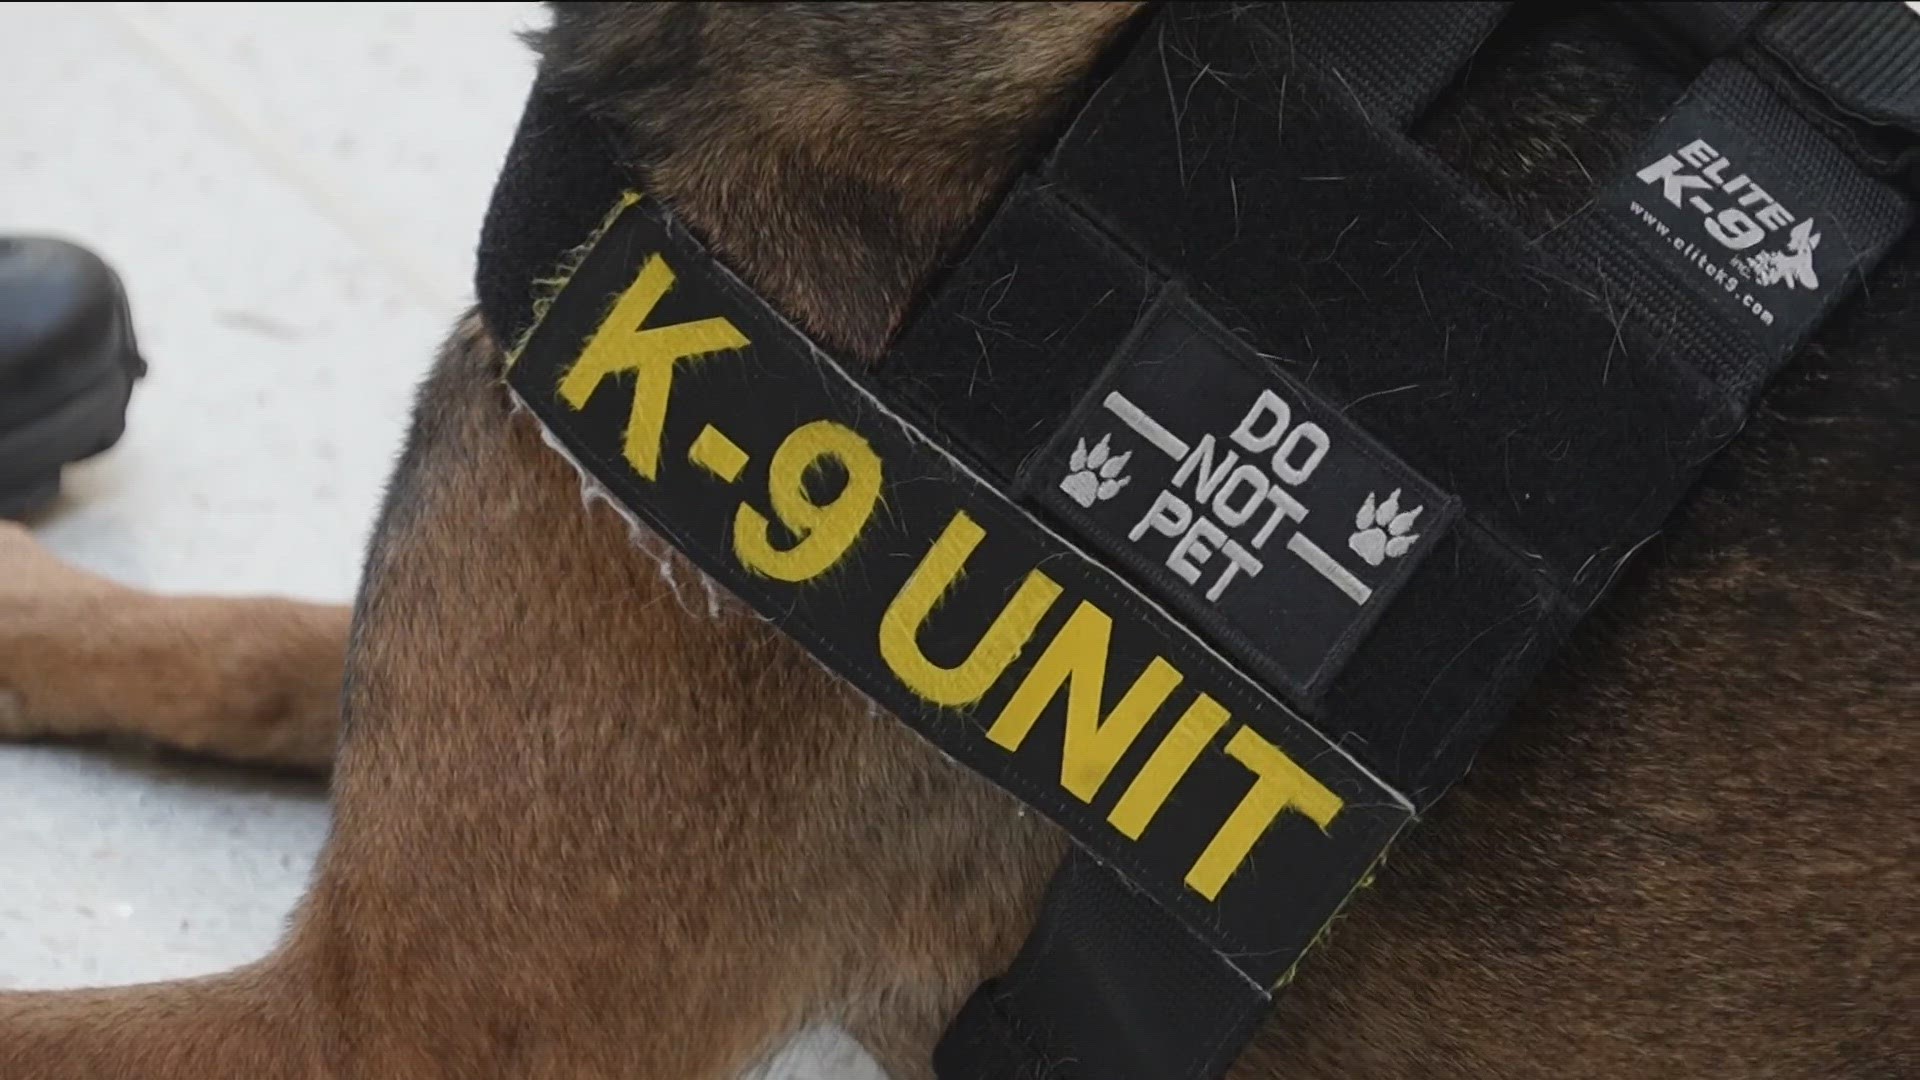 The mall’s K9 team recently expanded its skillset, learning how to sniff to detect guns and explosives in an ongoing effort to keep MOA patrons safer.